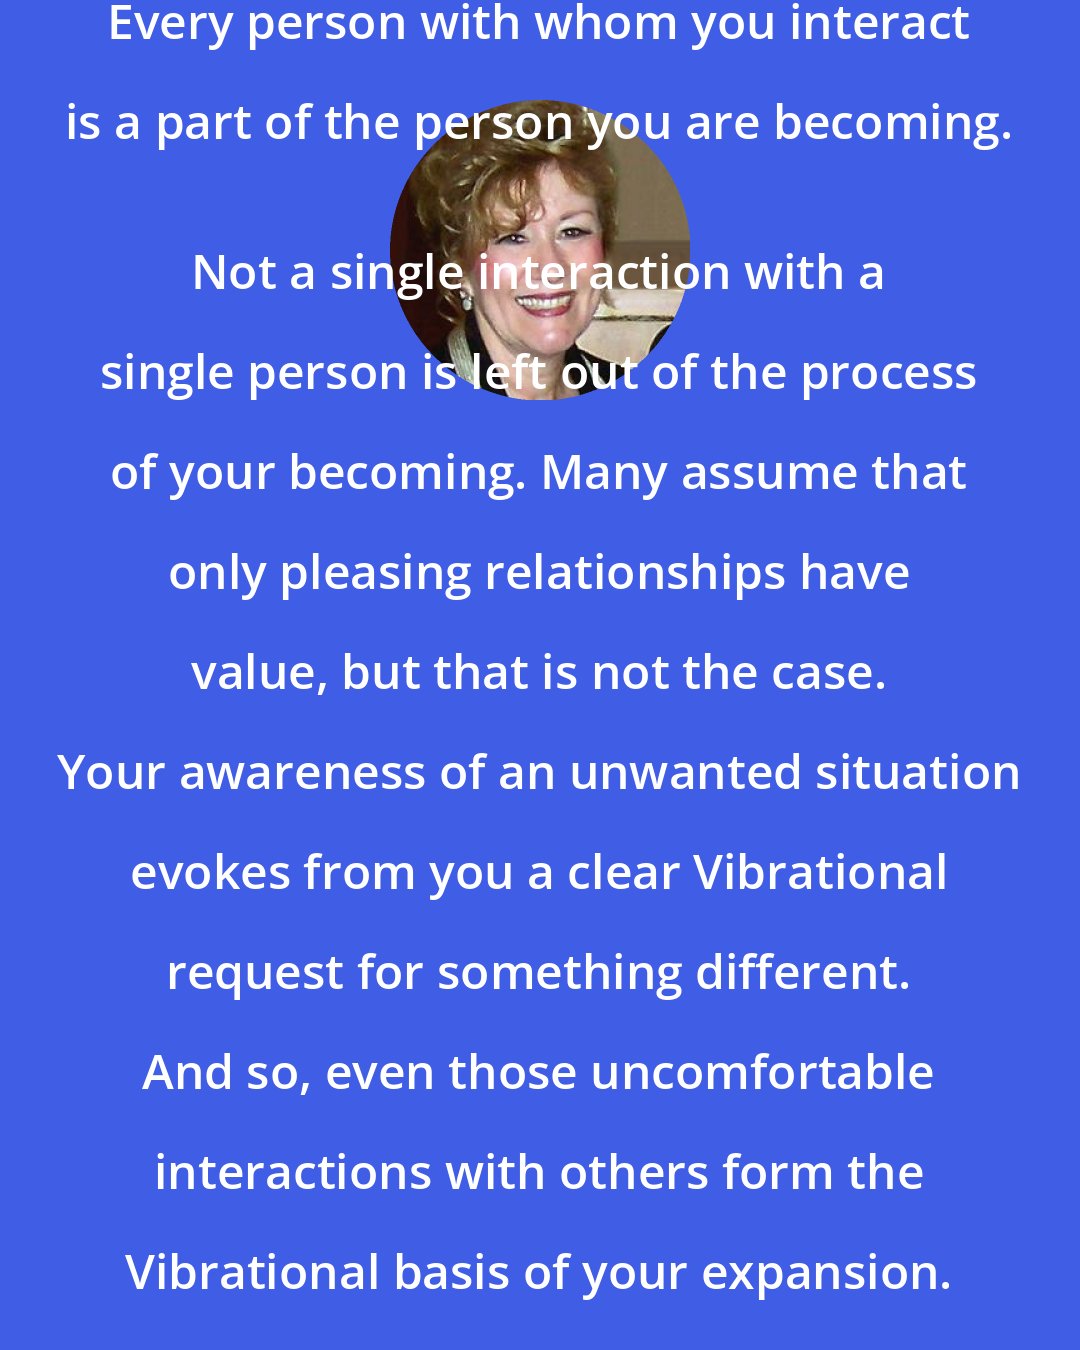 Esther Hicks: Every person with whom you interact is a part of the person you are becoming. 
 Not a single interaction with a single person is left out of the process of your becoming. Many assume that only pleasing relationships have value, but that is not the case. Your awareness of an unwanted situation evokes from you a clear Vibrational request for something different. And so, even those uncomfortable interactions with others form the Vibrational basis of your expansion.